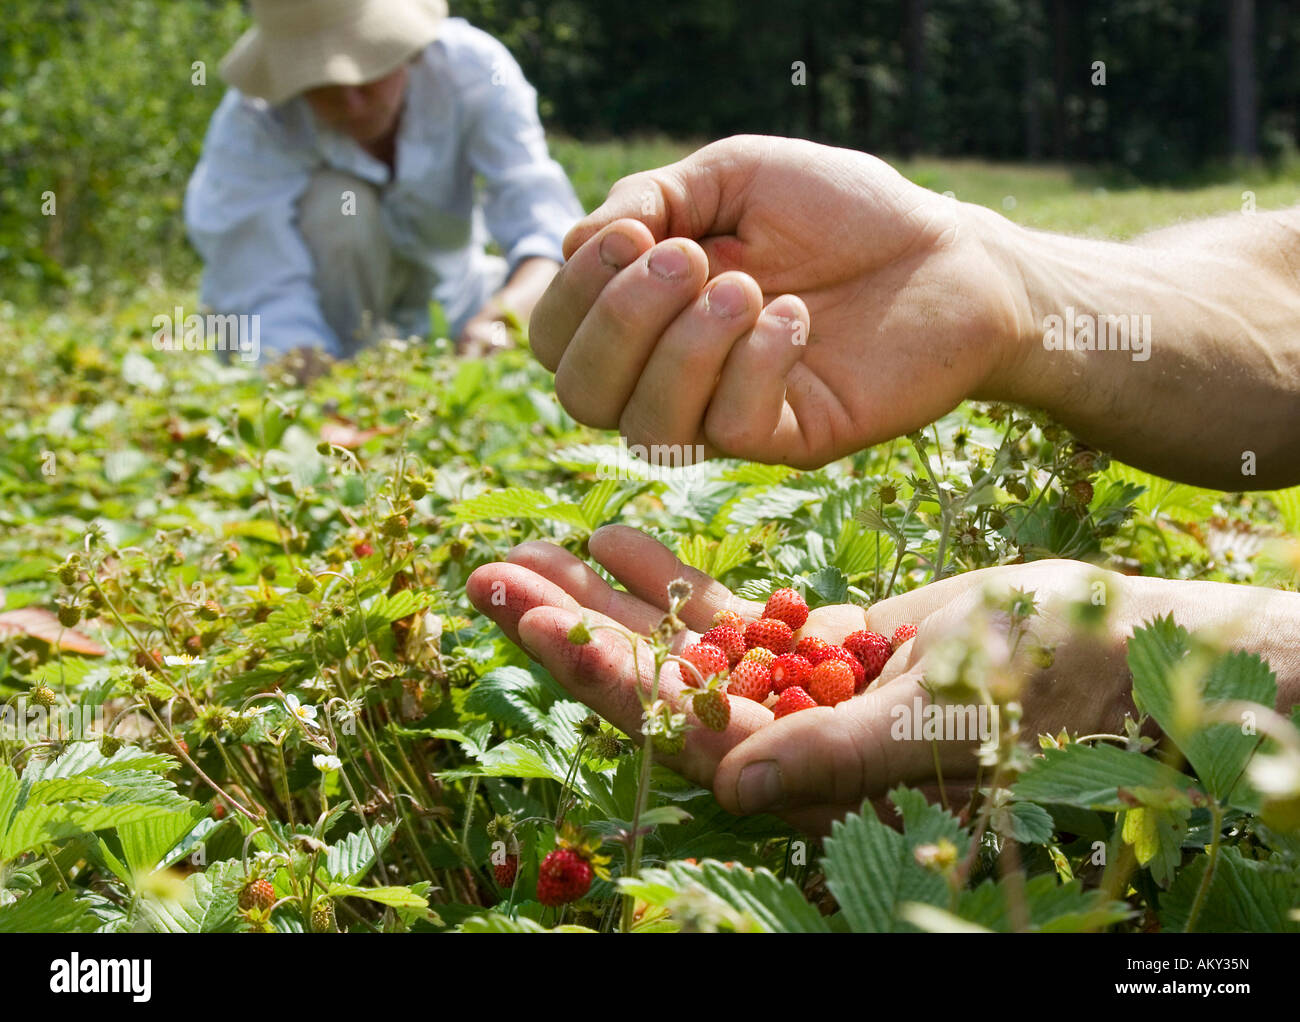 Harvesting wild strawberries for the production of remedies at the Weleda Company Stock Photo